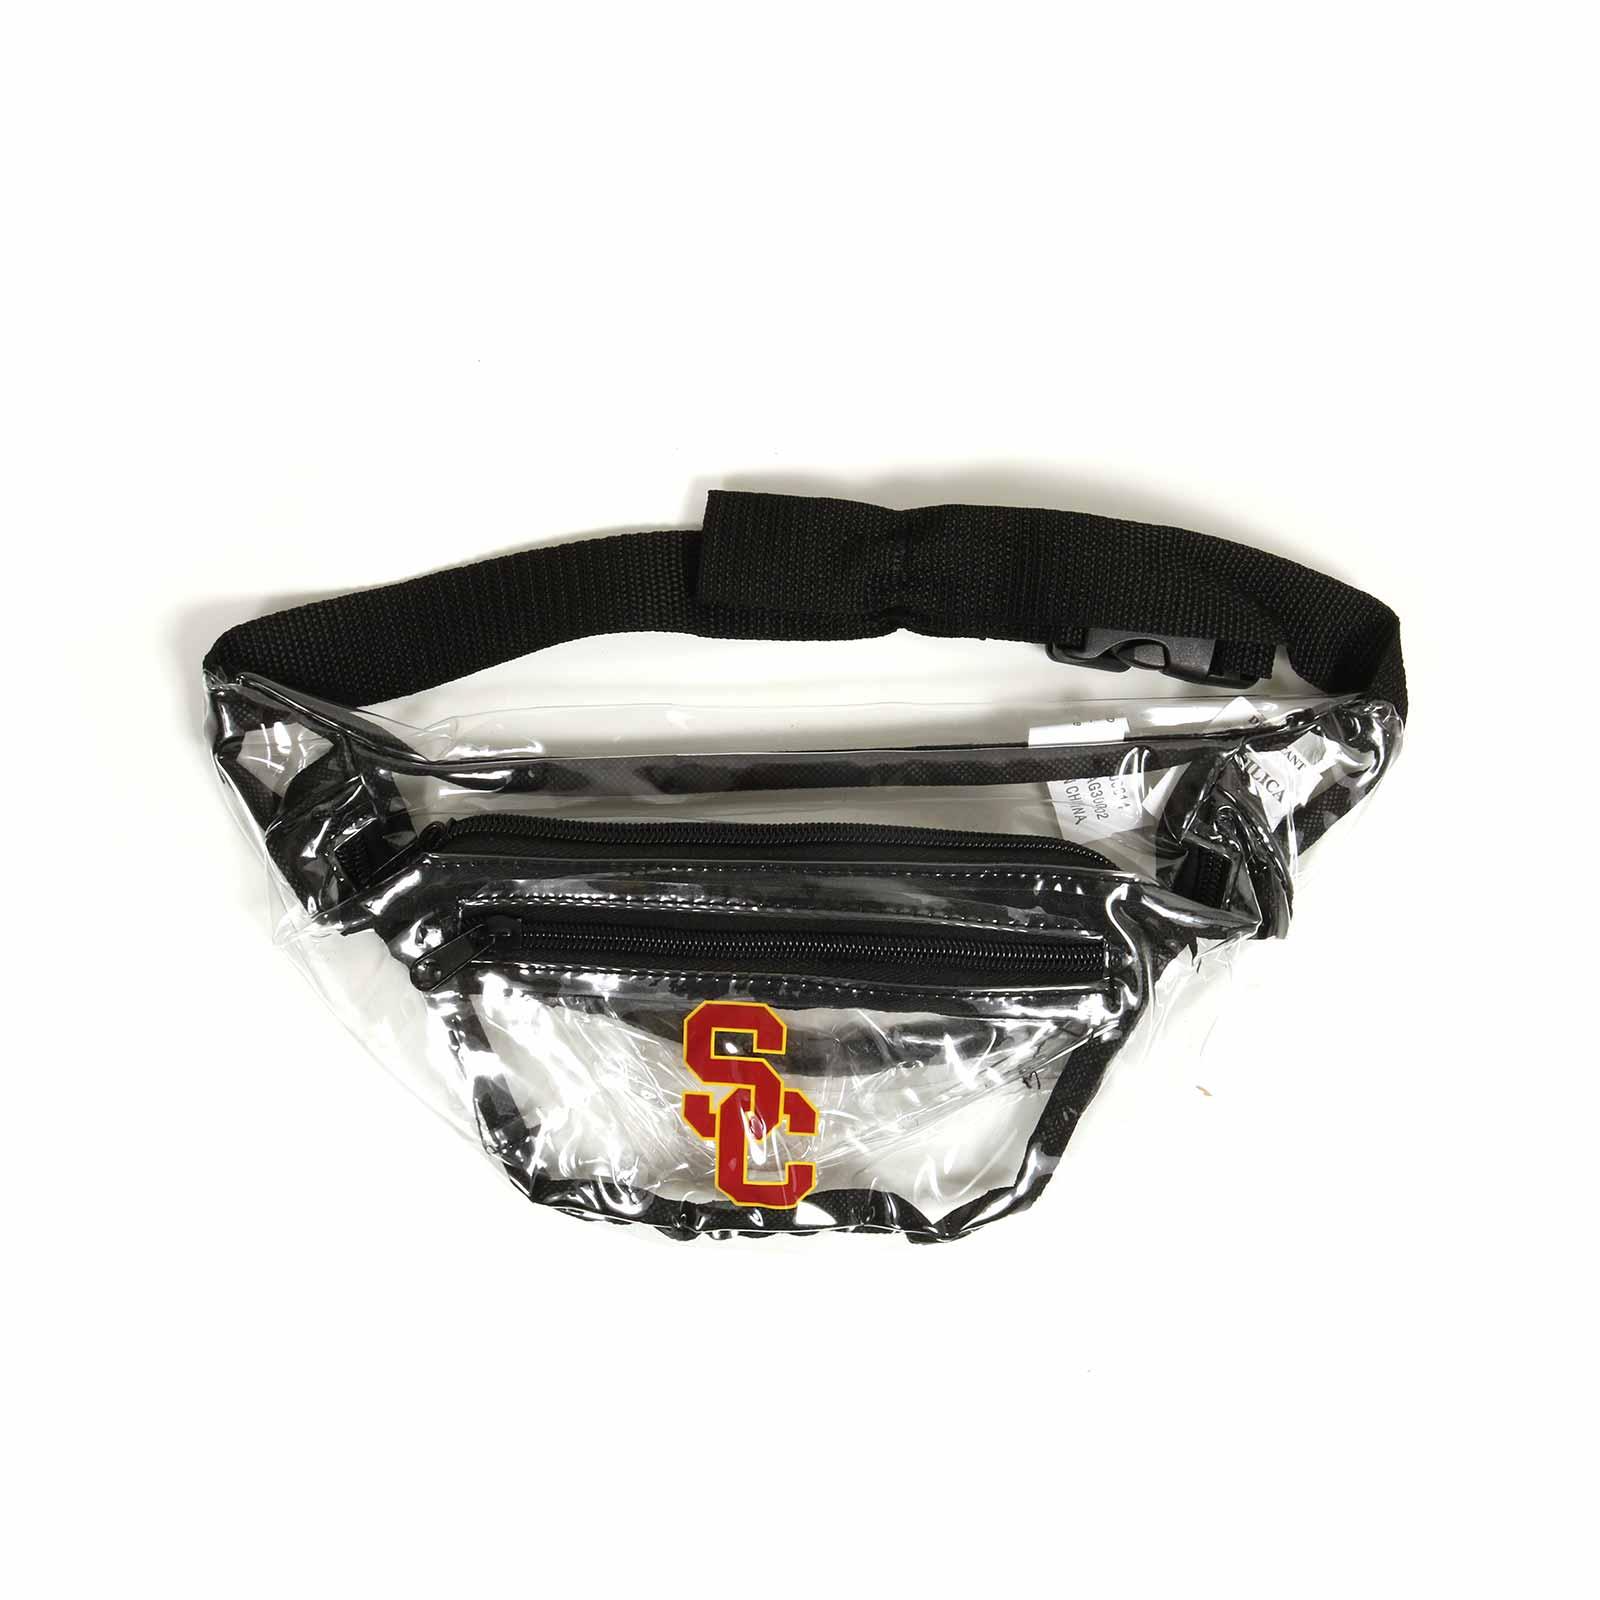 SC Interlock Clear Fanny Pack with Black Trim image01